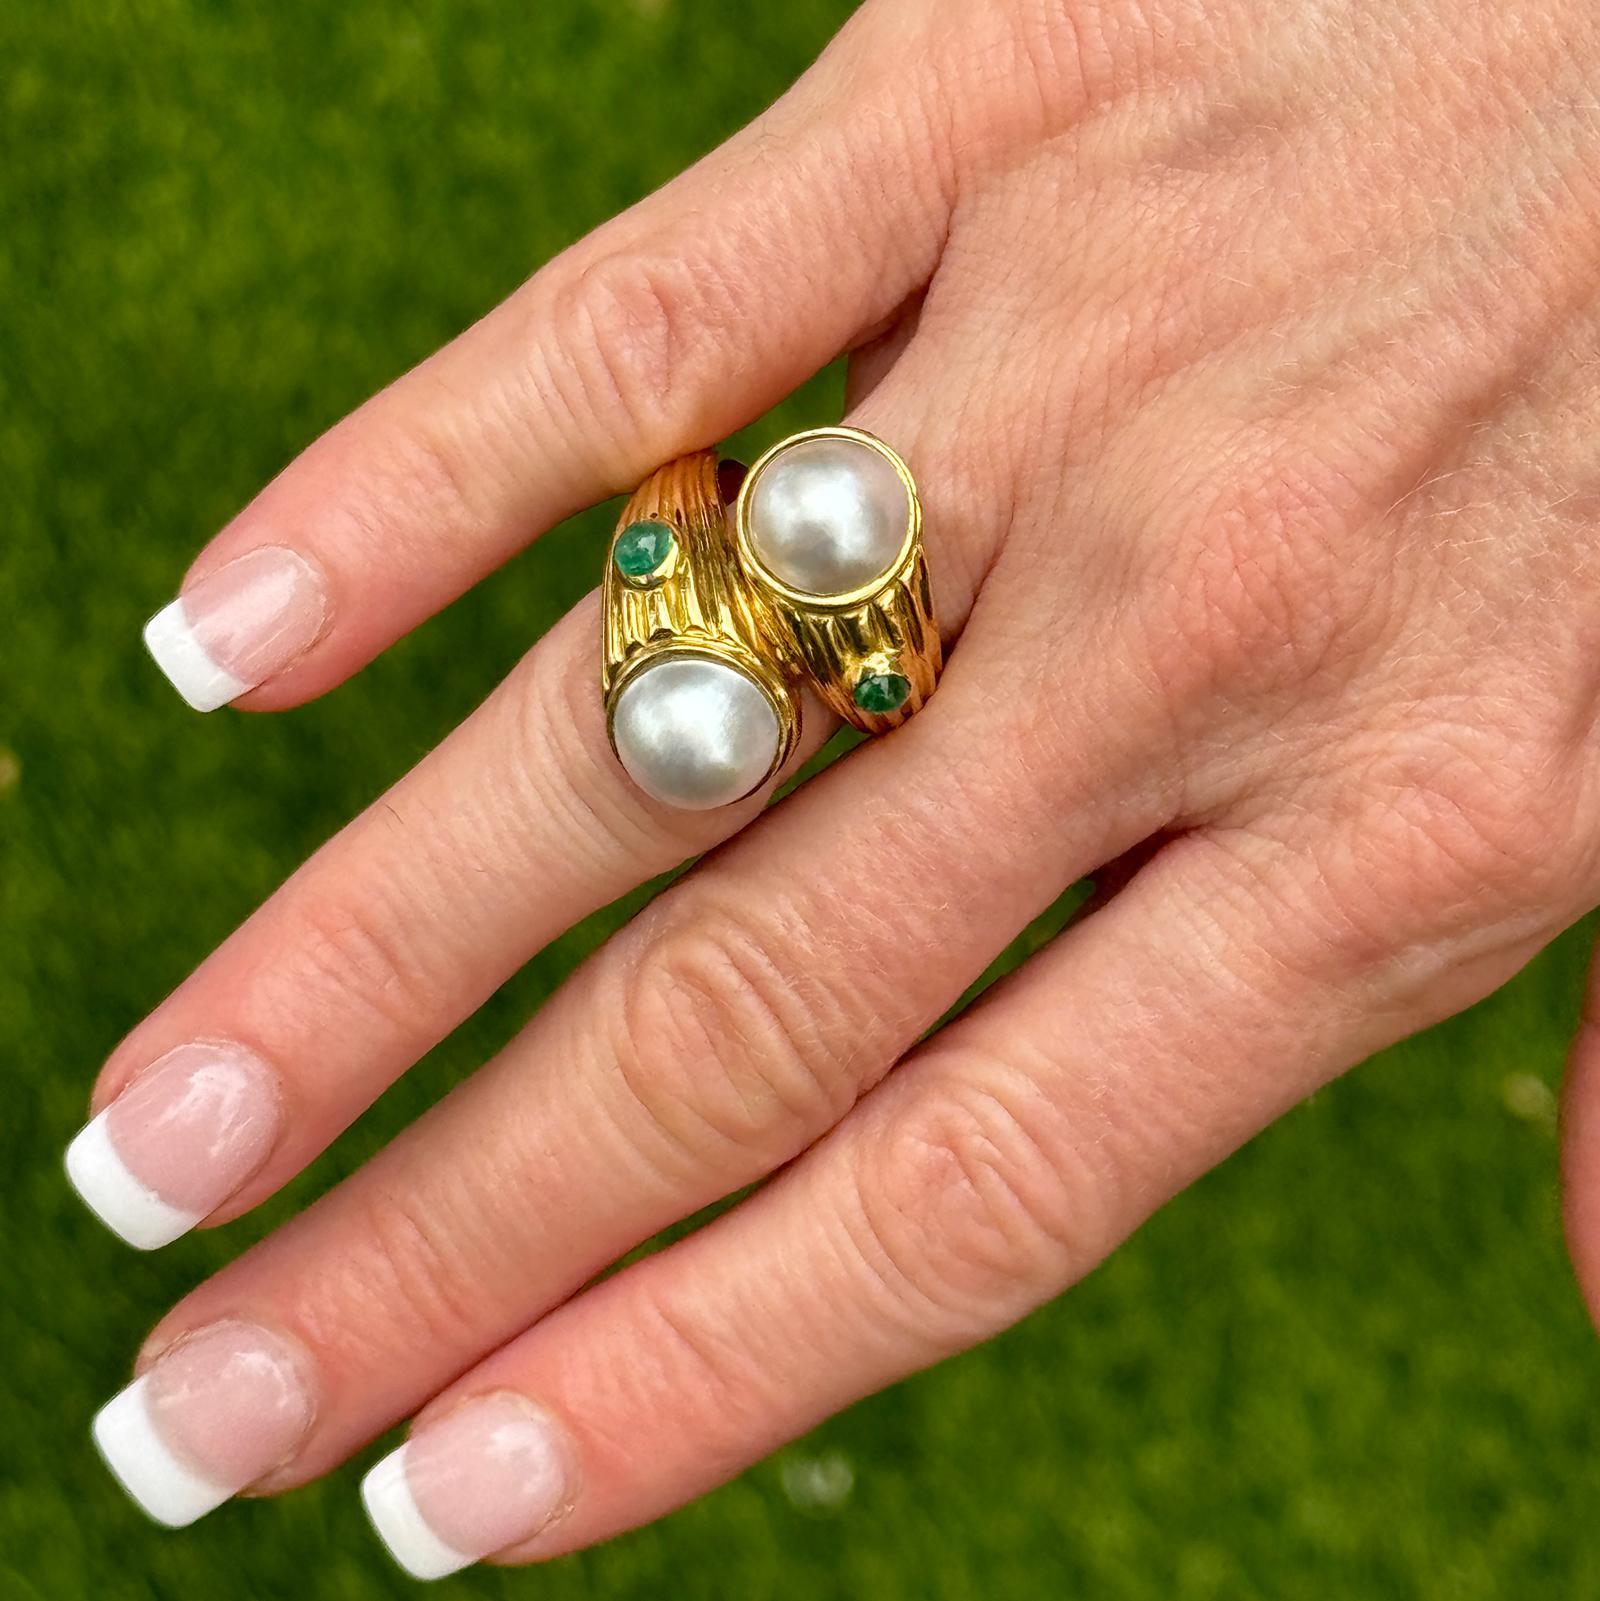 Pearl and emerald vintage bypass ring handcrafted in ribbed 18 karat yellow gold. The ring features two 10mm cultured pearls and 2 bezel set emerald accents. The ring measures 15mm in front in width, and is currently size 7 ( can be sized). Weight: